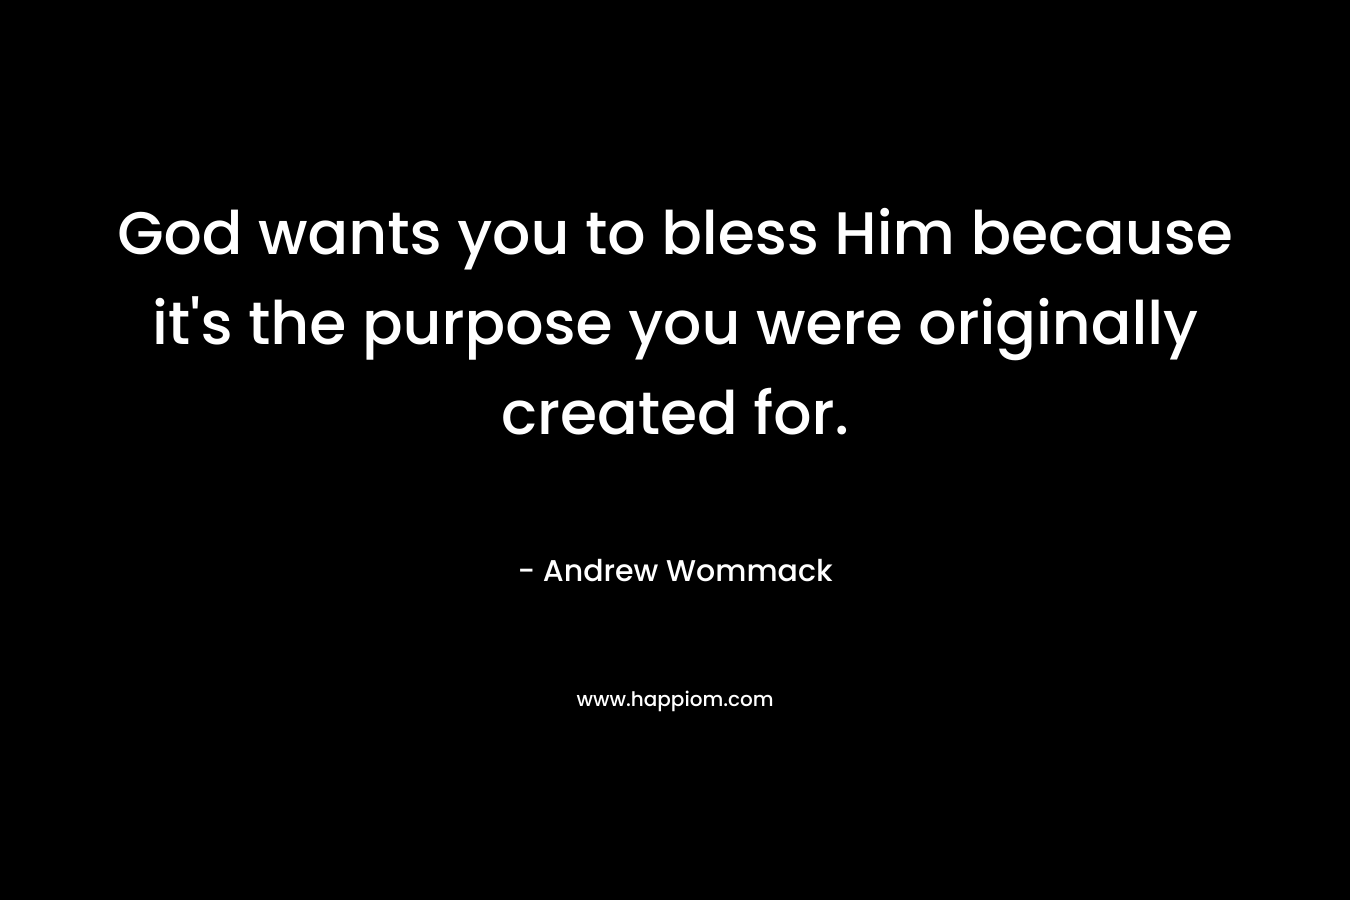 God wants you to bless Him because it's the purpose you were originally created for.